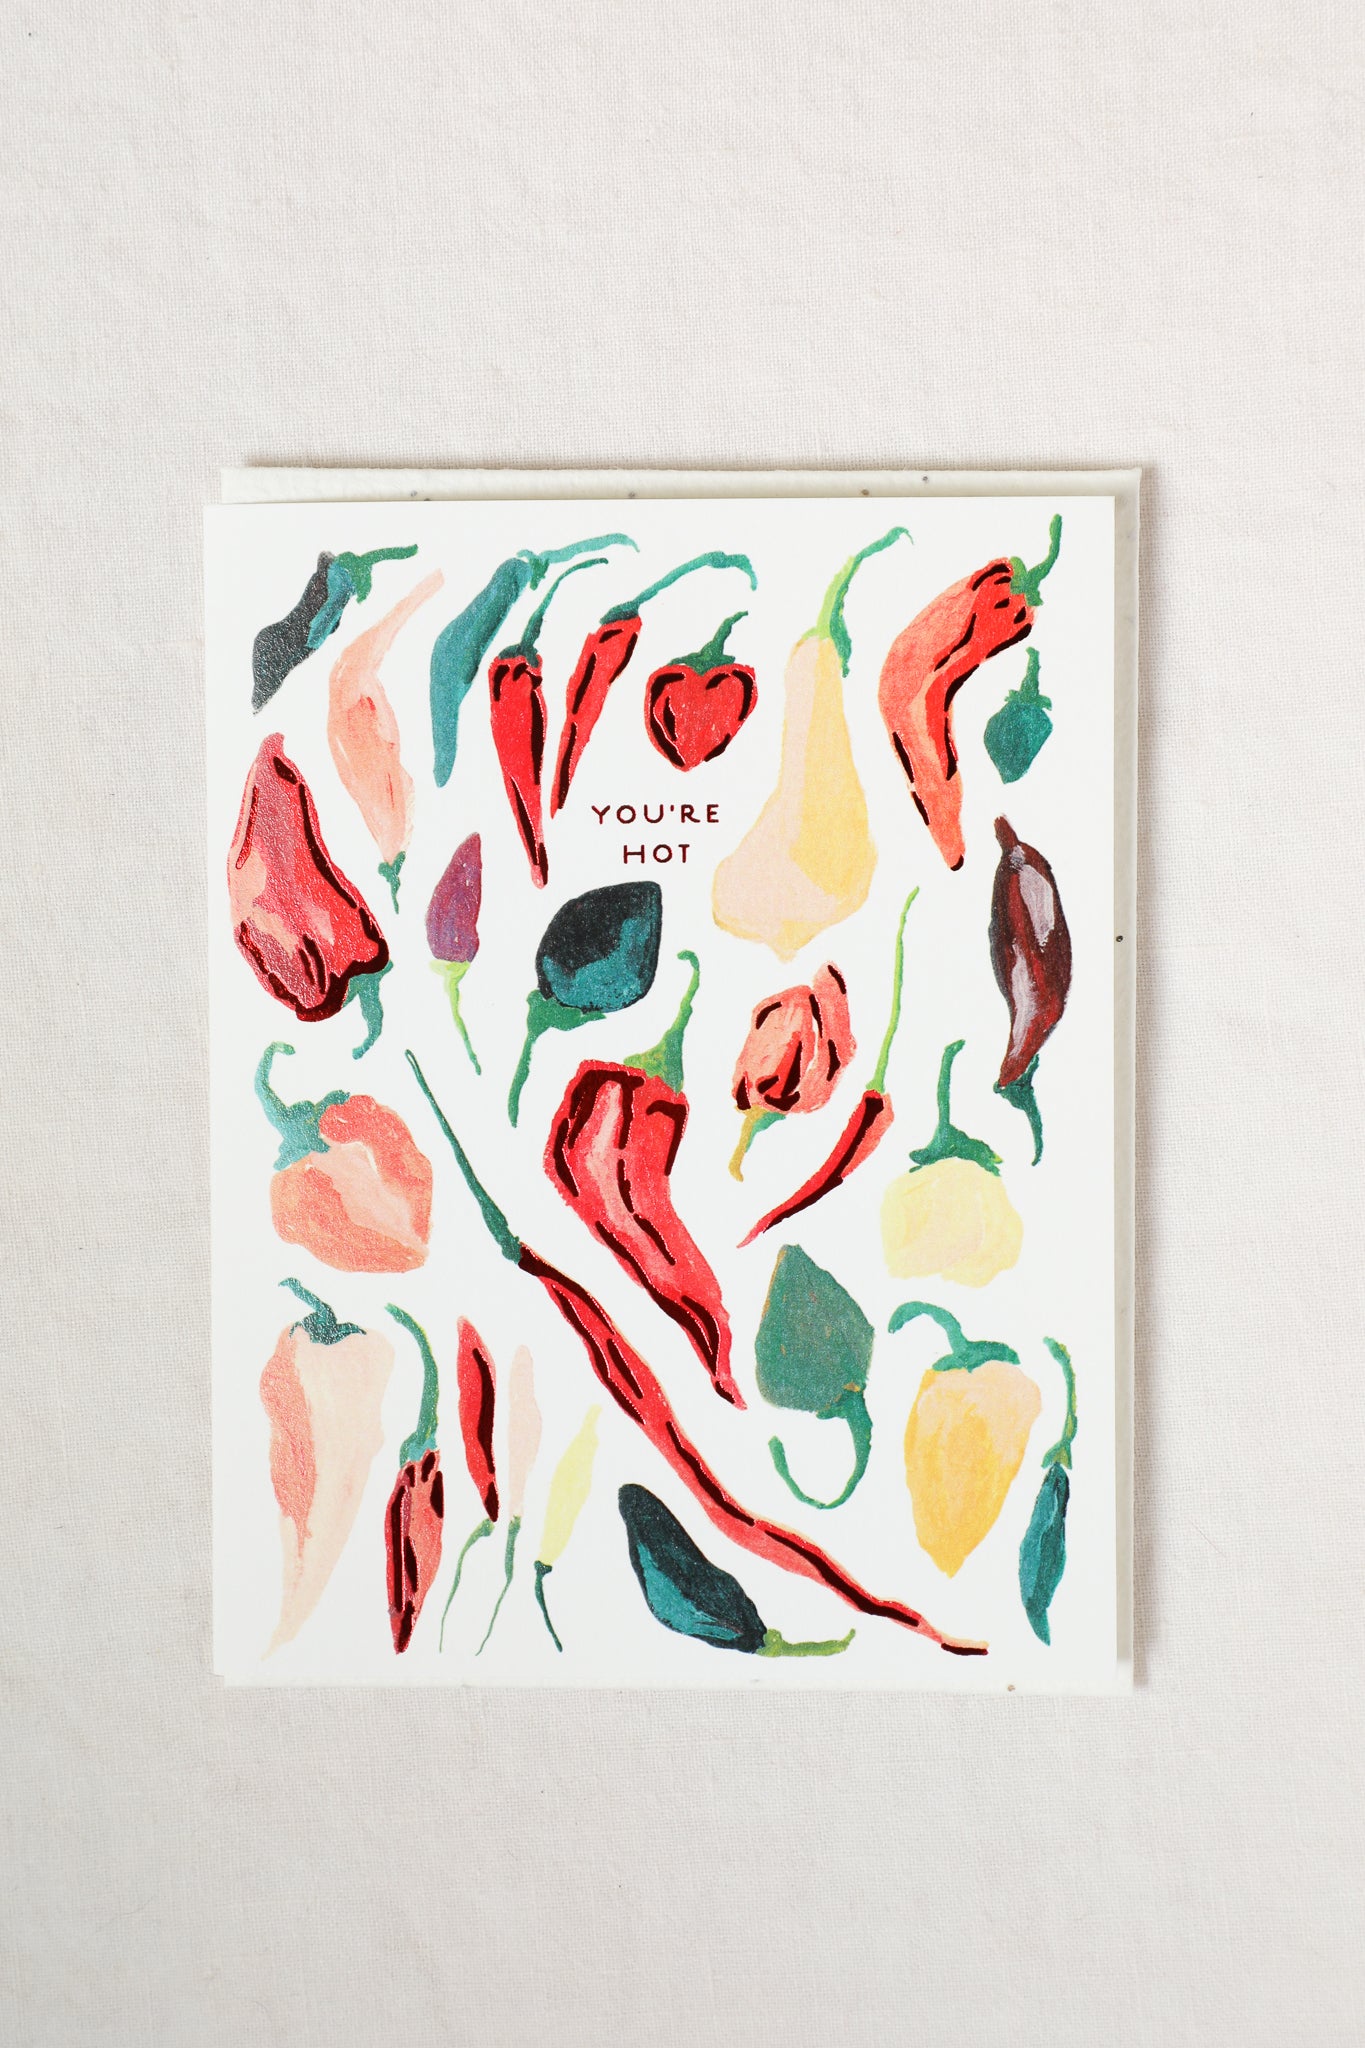 You're Hot - Plantable Greeting Card